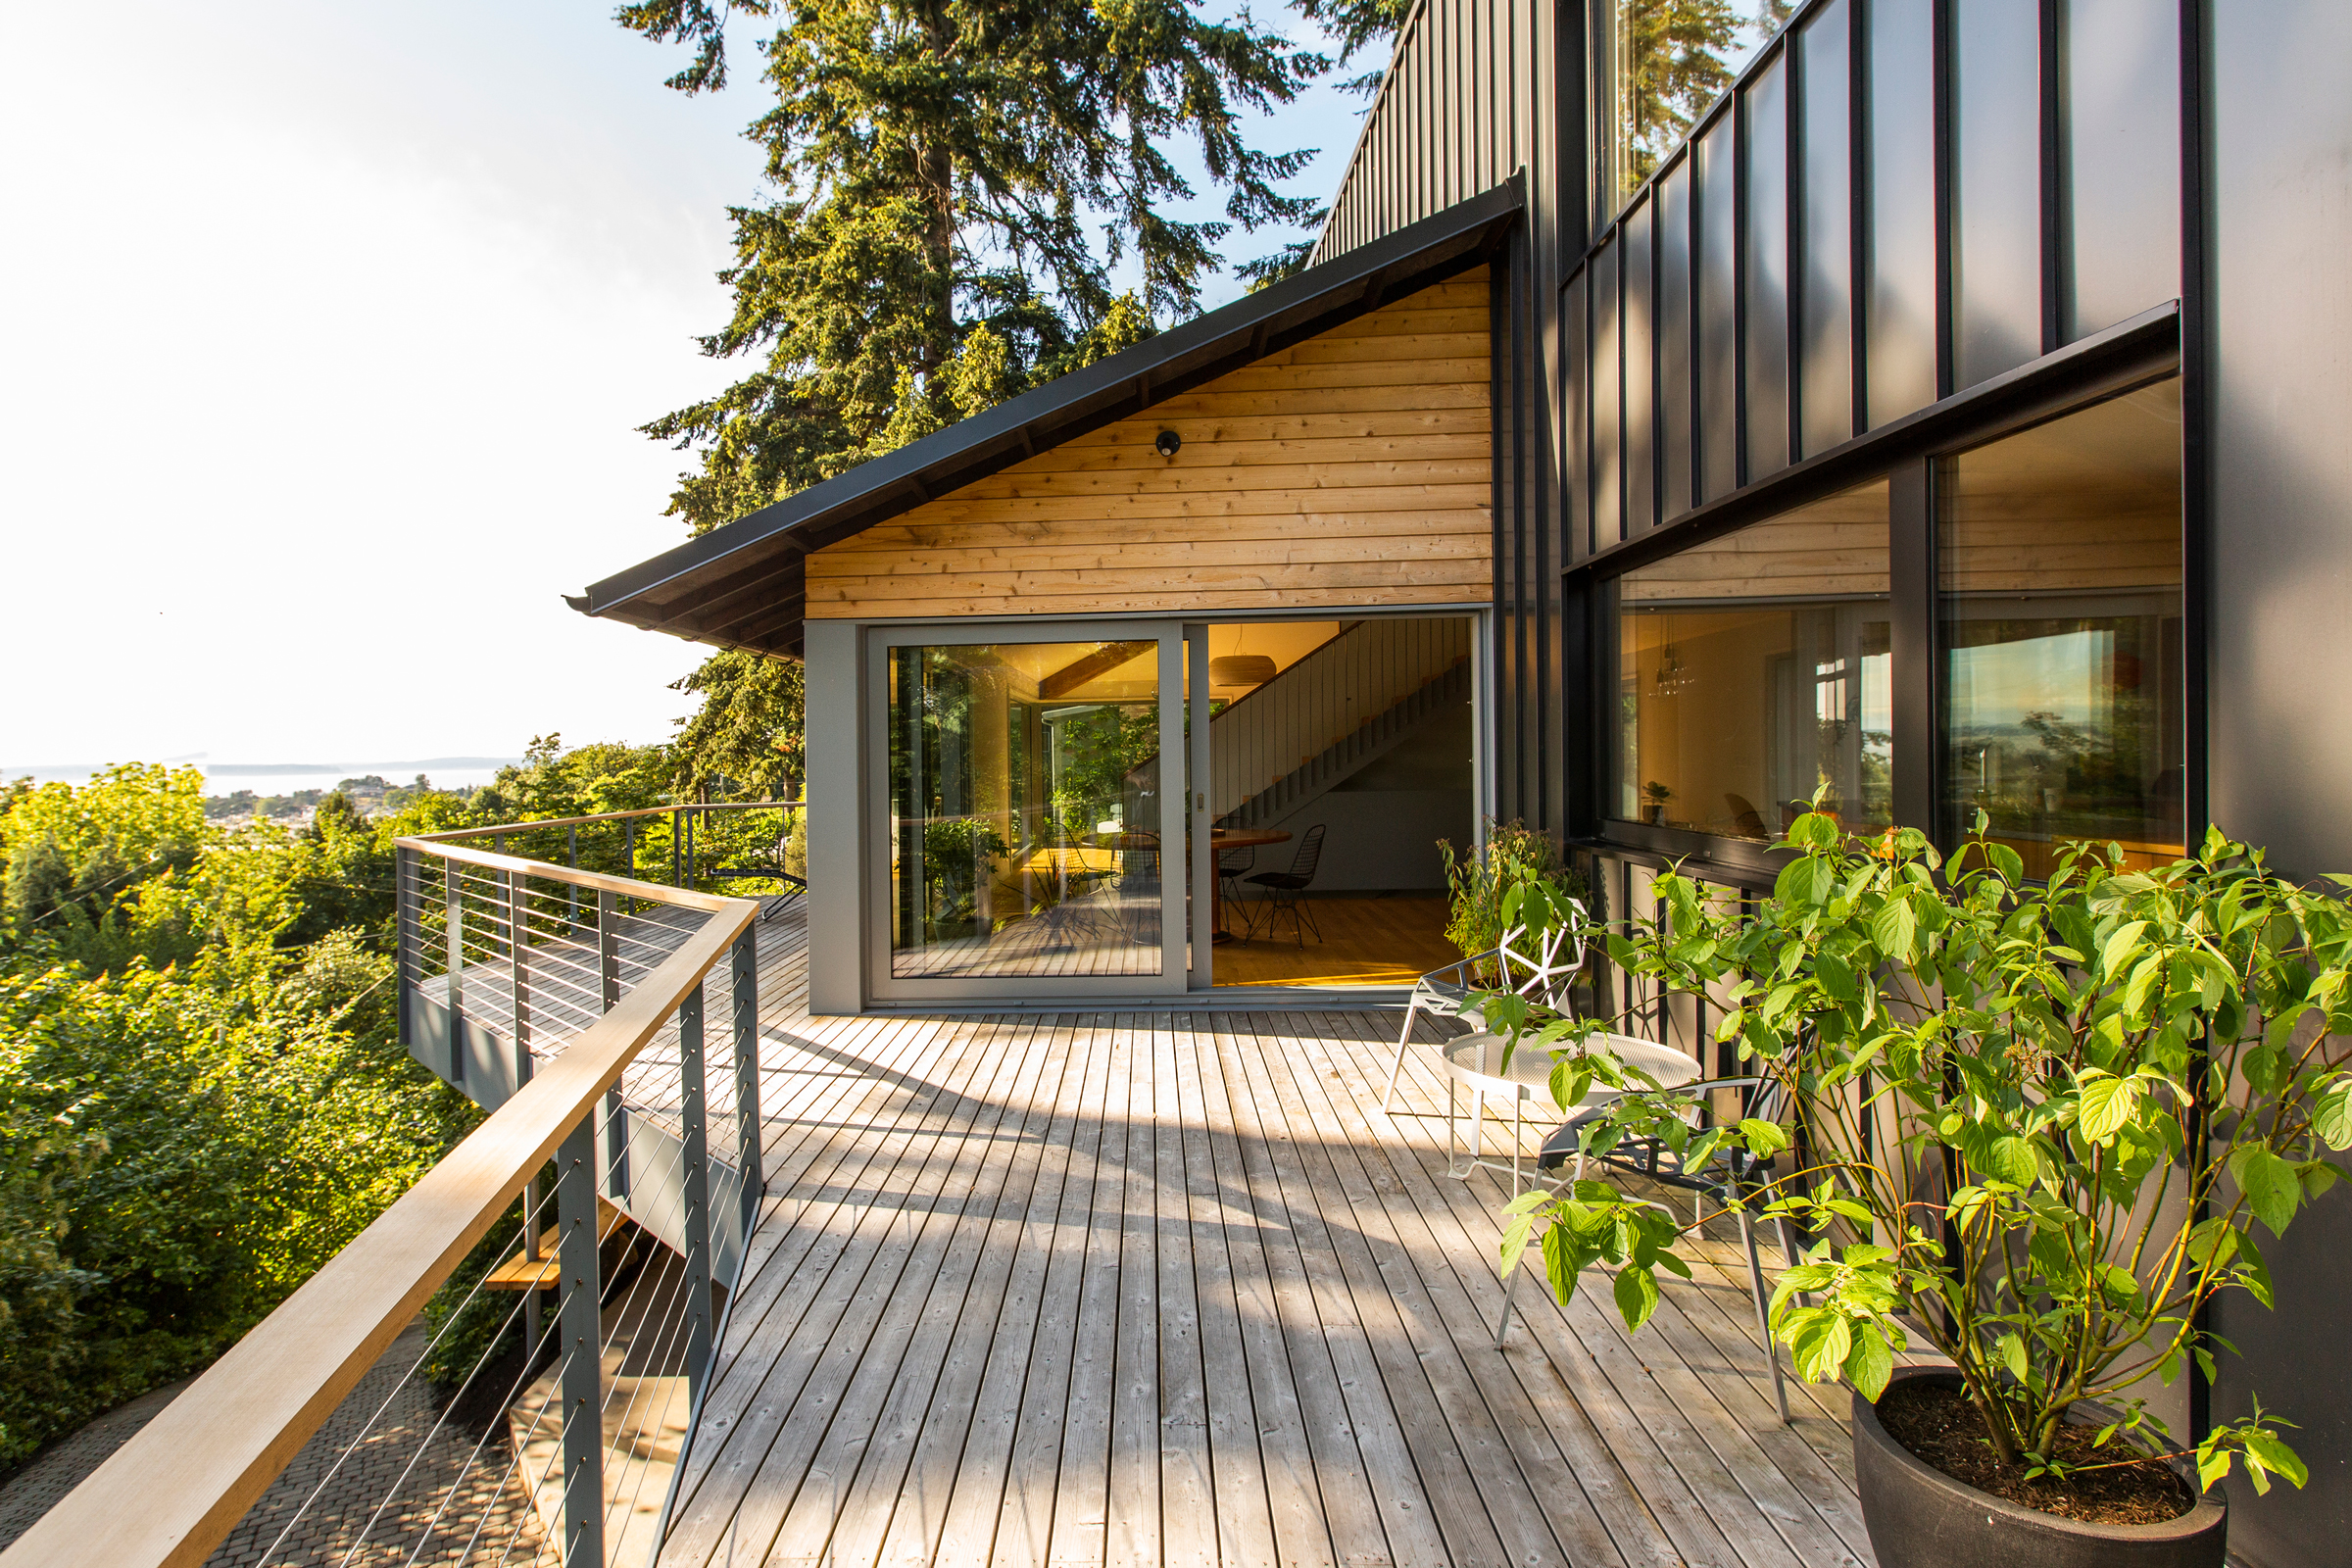 Inside the SHED Architecture + Design Net-Zero Home Inspired by the Circus